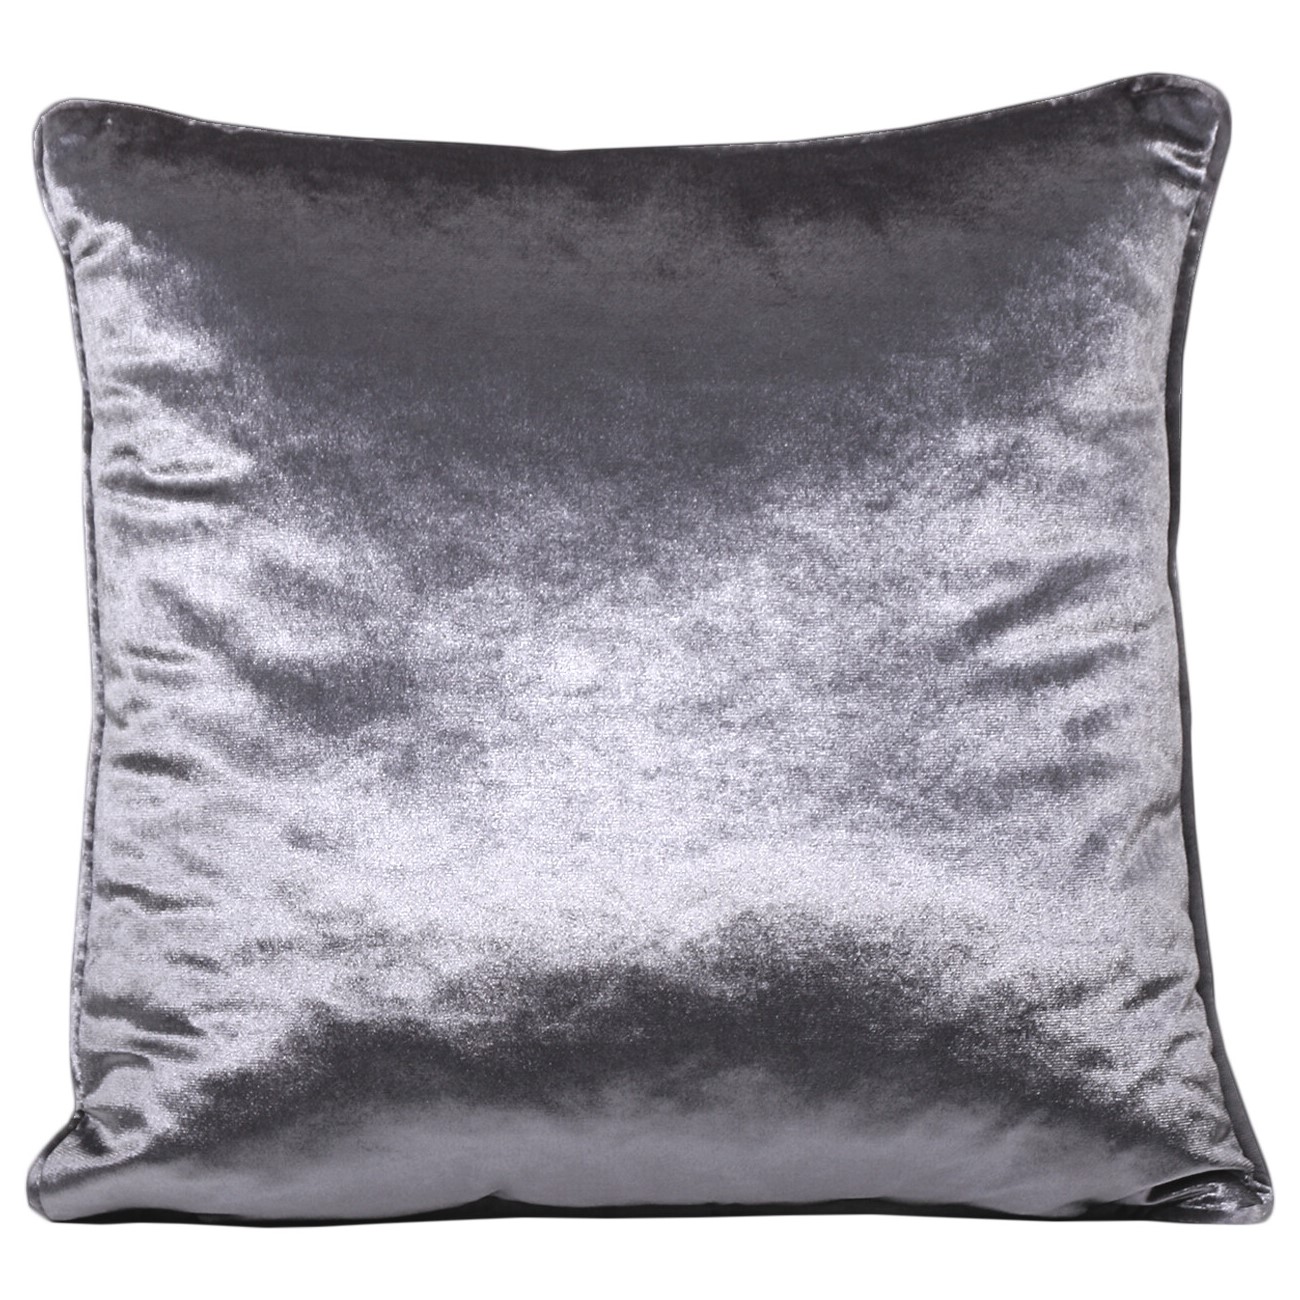 Belvedere Velvet Piped Cushion - Charcoal Image